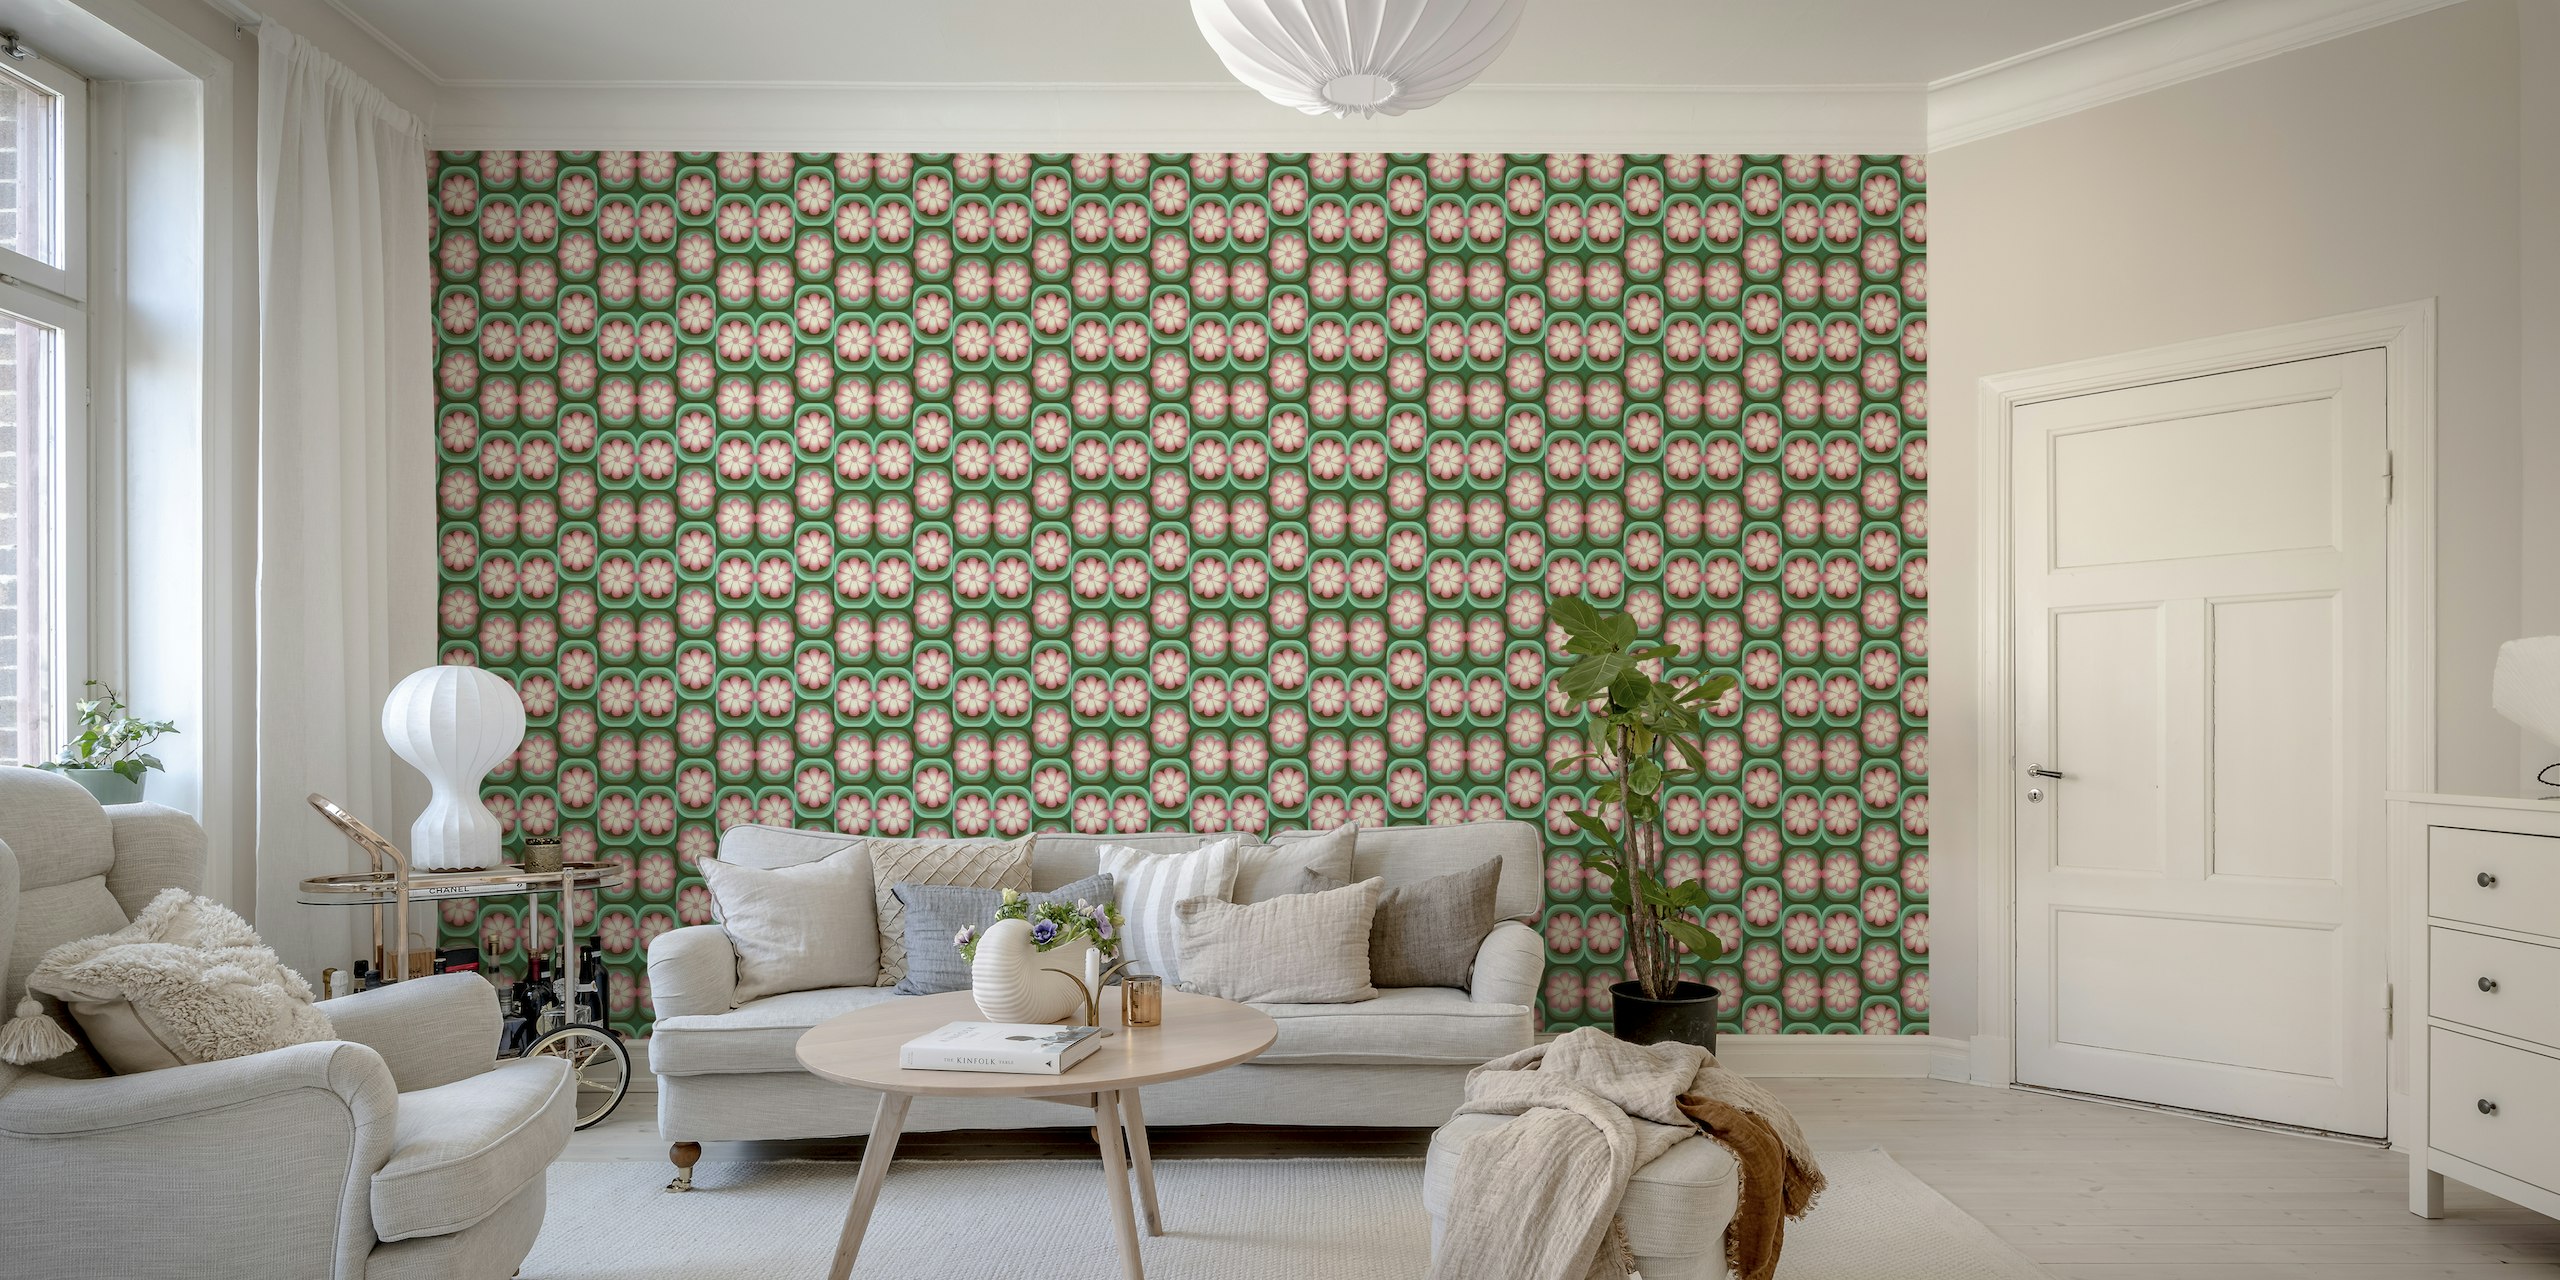 70s-inspired floral wall mural with pink, green, and brown design